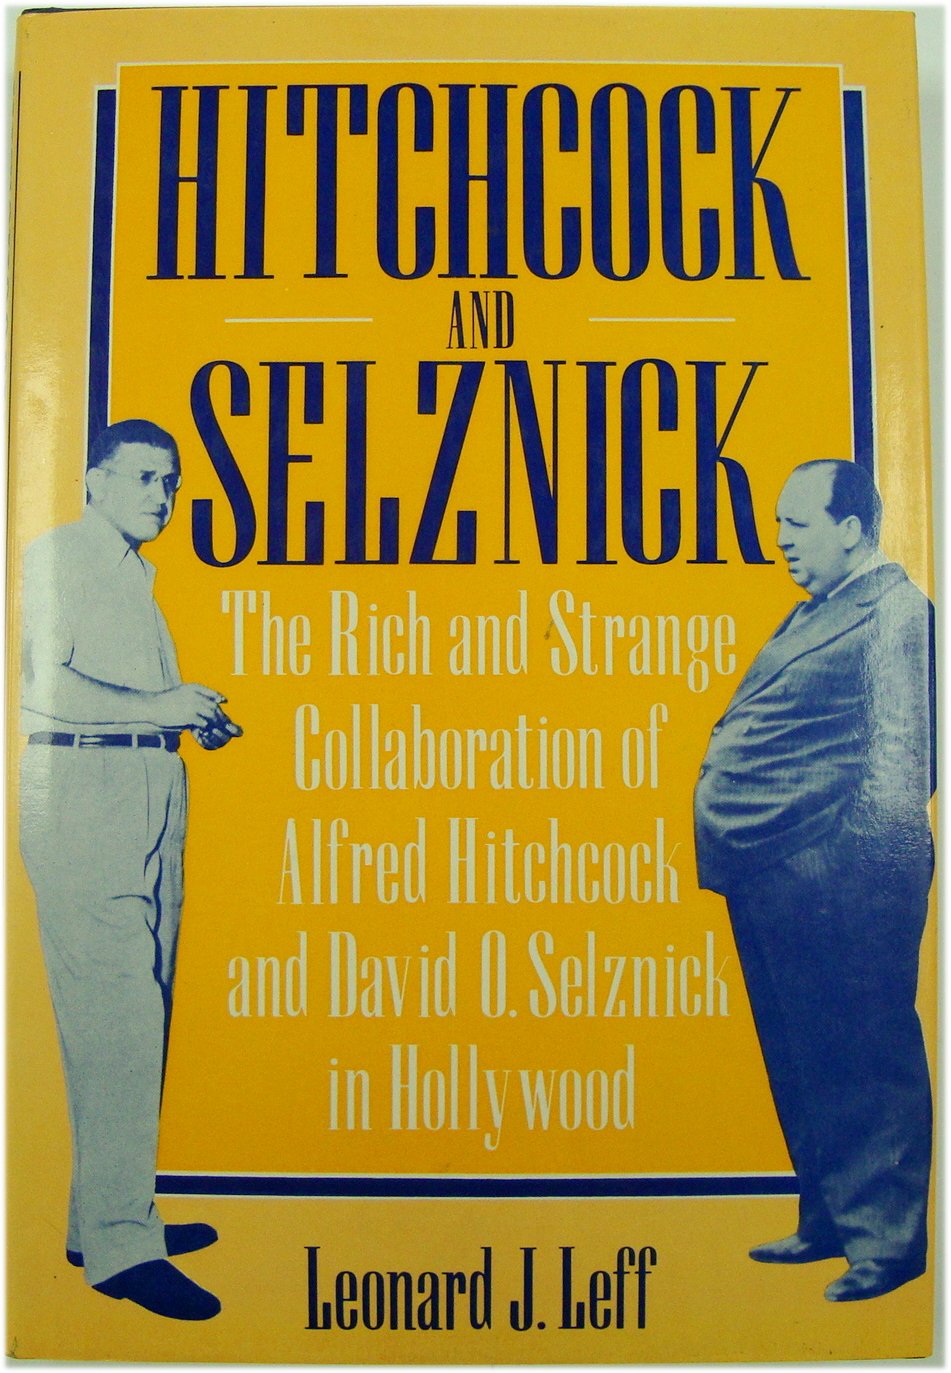 Hitchcock and Selznick: The Rich and Strange Collaboration of Alfred Hitchcock and David O.Selznick in Hollywood